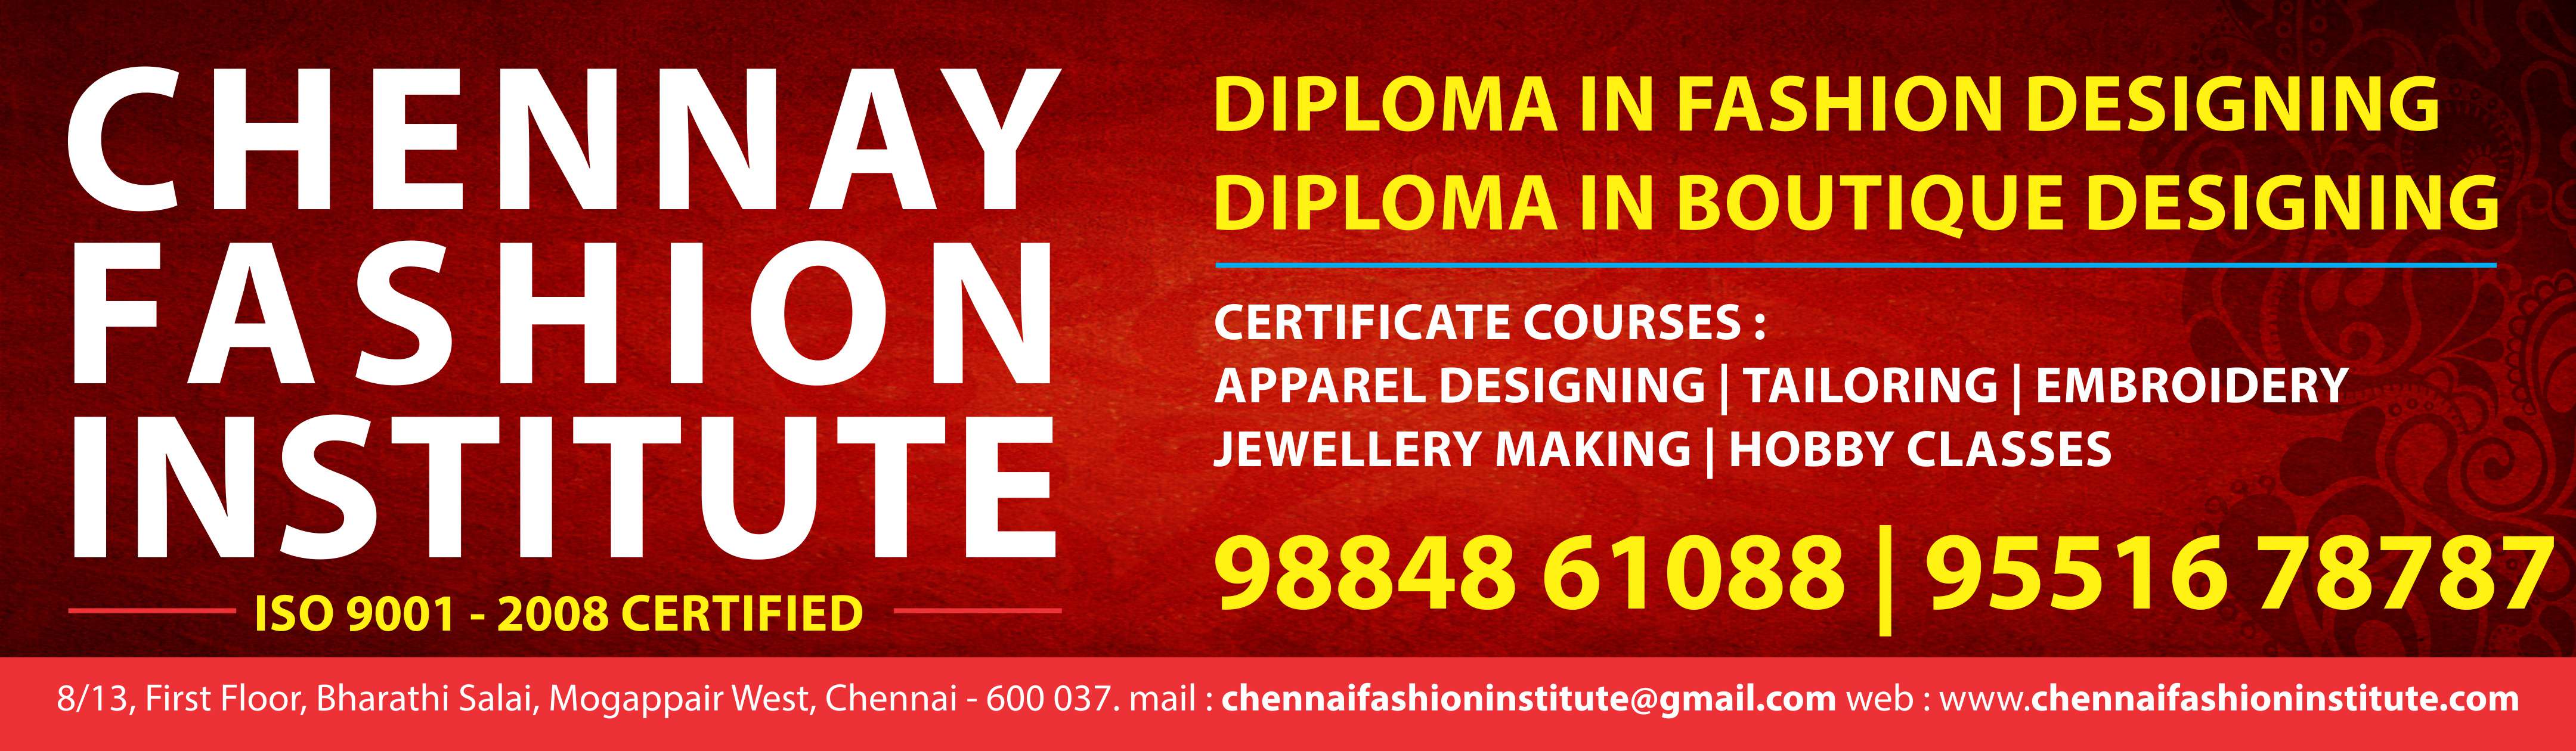 Contact : +91-9884861088 for best Tailoring courses